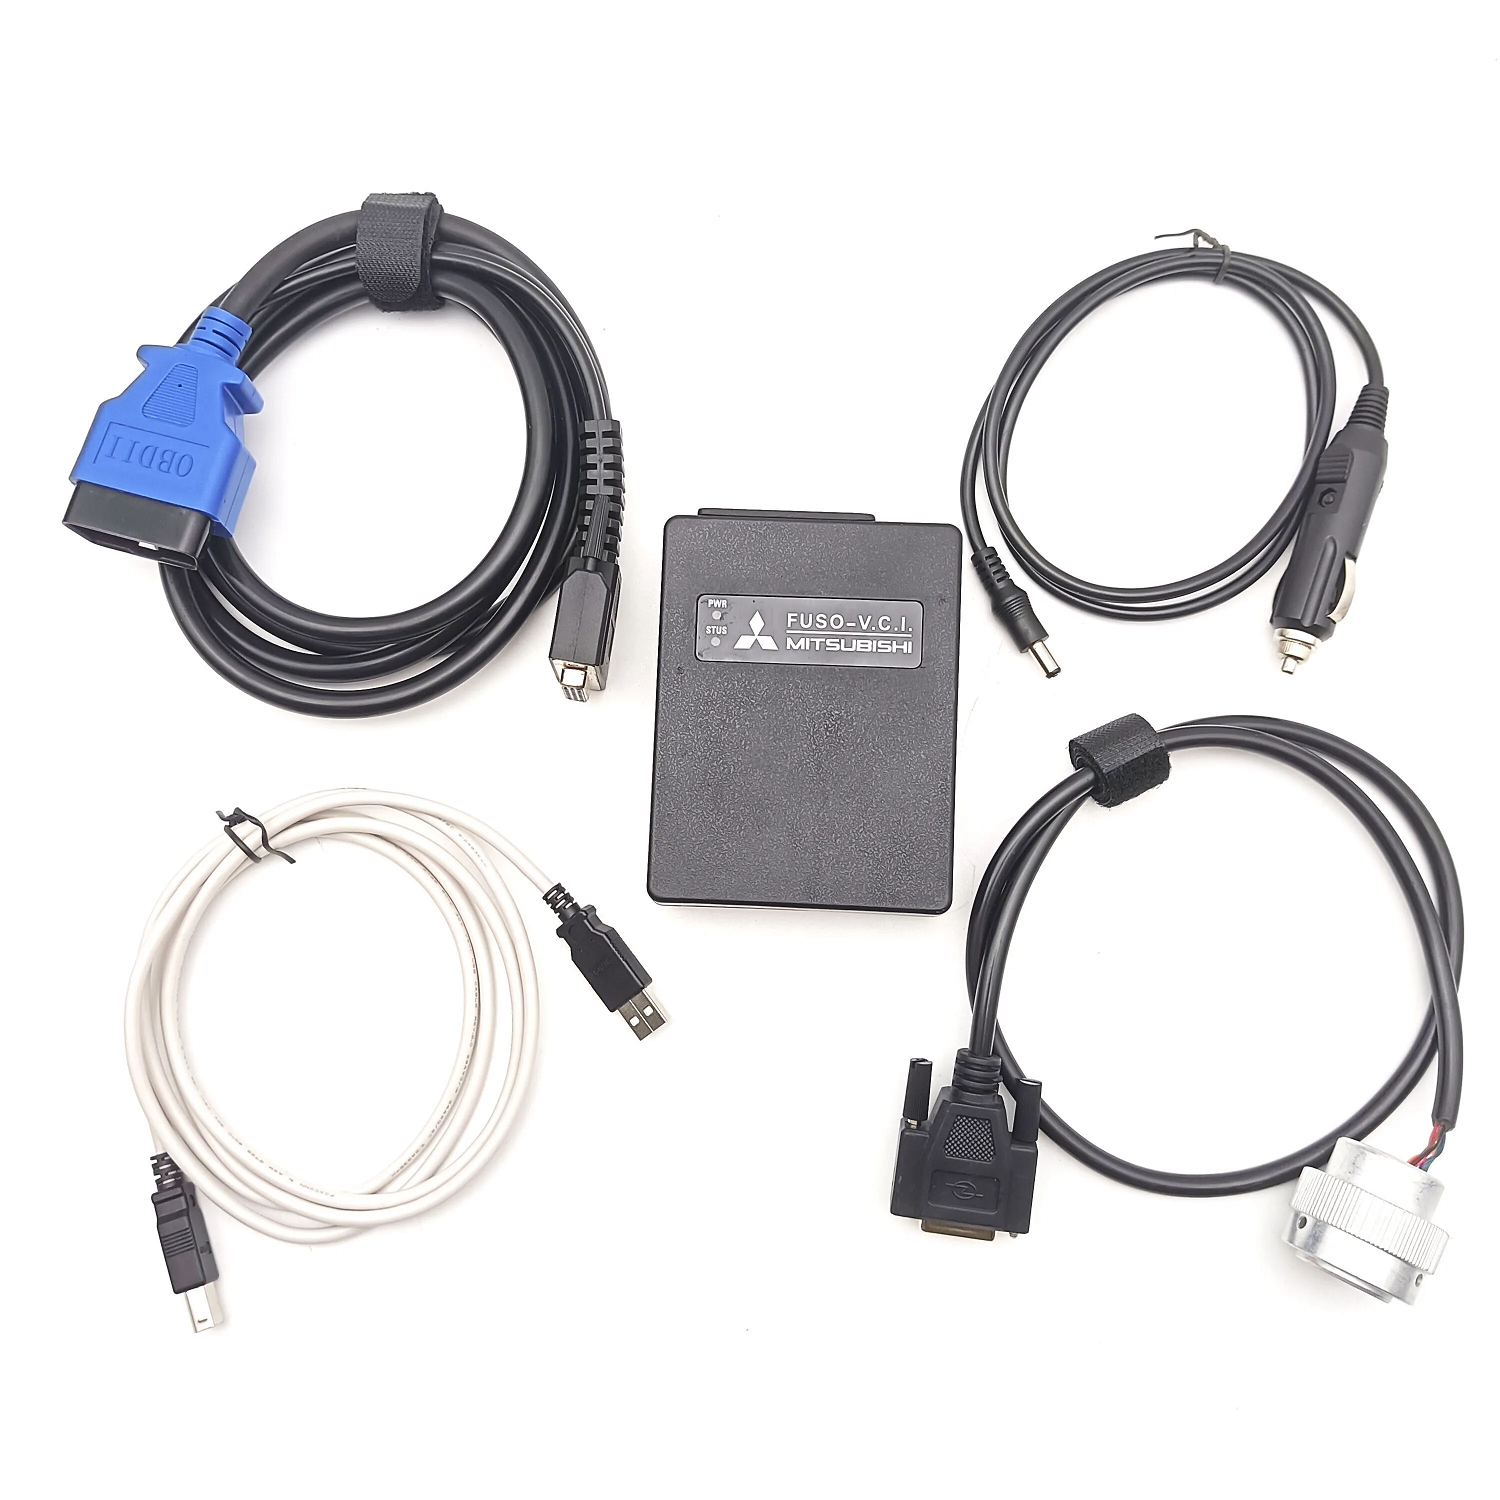 The diagnostic service tool MH064698 OEM for Mitsubishi Fuso vehicle communication interface MUT-III MUT3